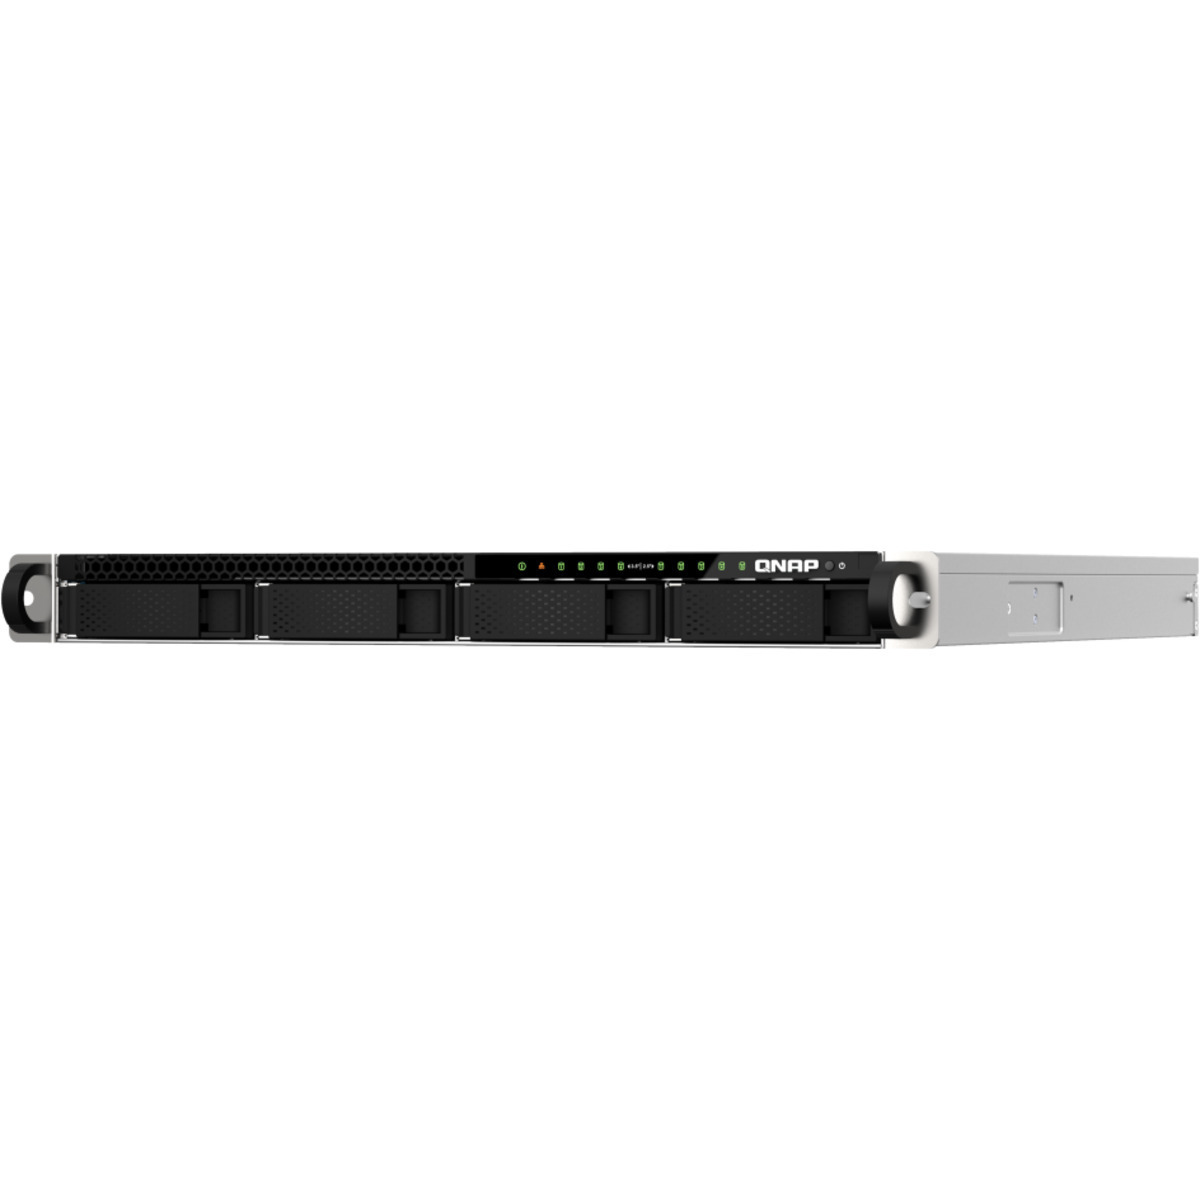 buy QNAP TS-h987XU-RP QuTS hero Edition 24tb RackMount NAS - Network Attached Storage Device 4x6000gb Western Digital Red WD60EFAX 3.5 5400rpm SATA 6Gb/s HDD NAS Class Drives Installed - Burn-In Tested - ON SALE - nas headquarters buy network attached storage server device das new raid-5 free shipping simply usa TS-h987XU-RP QuTS hero Edition